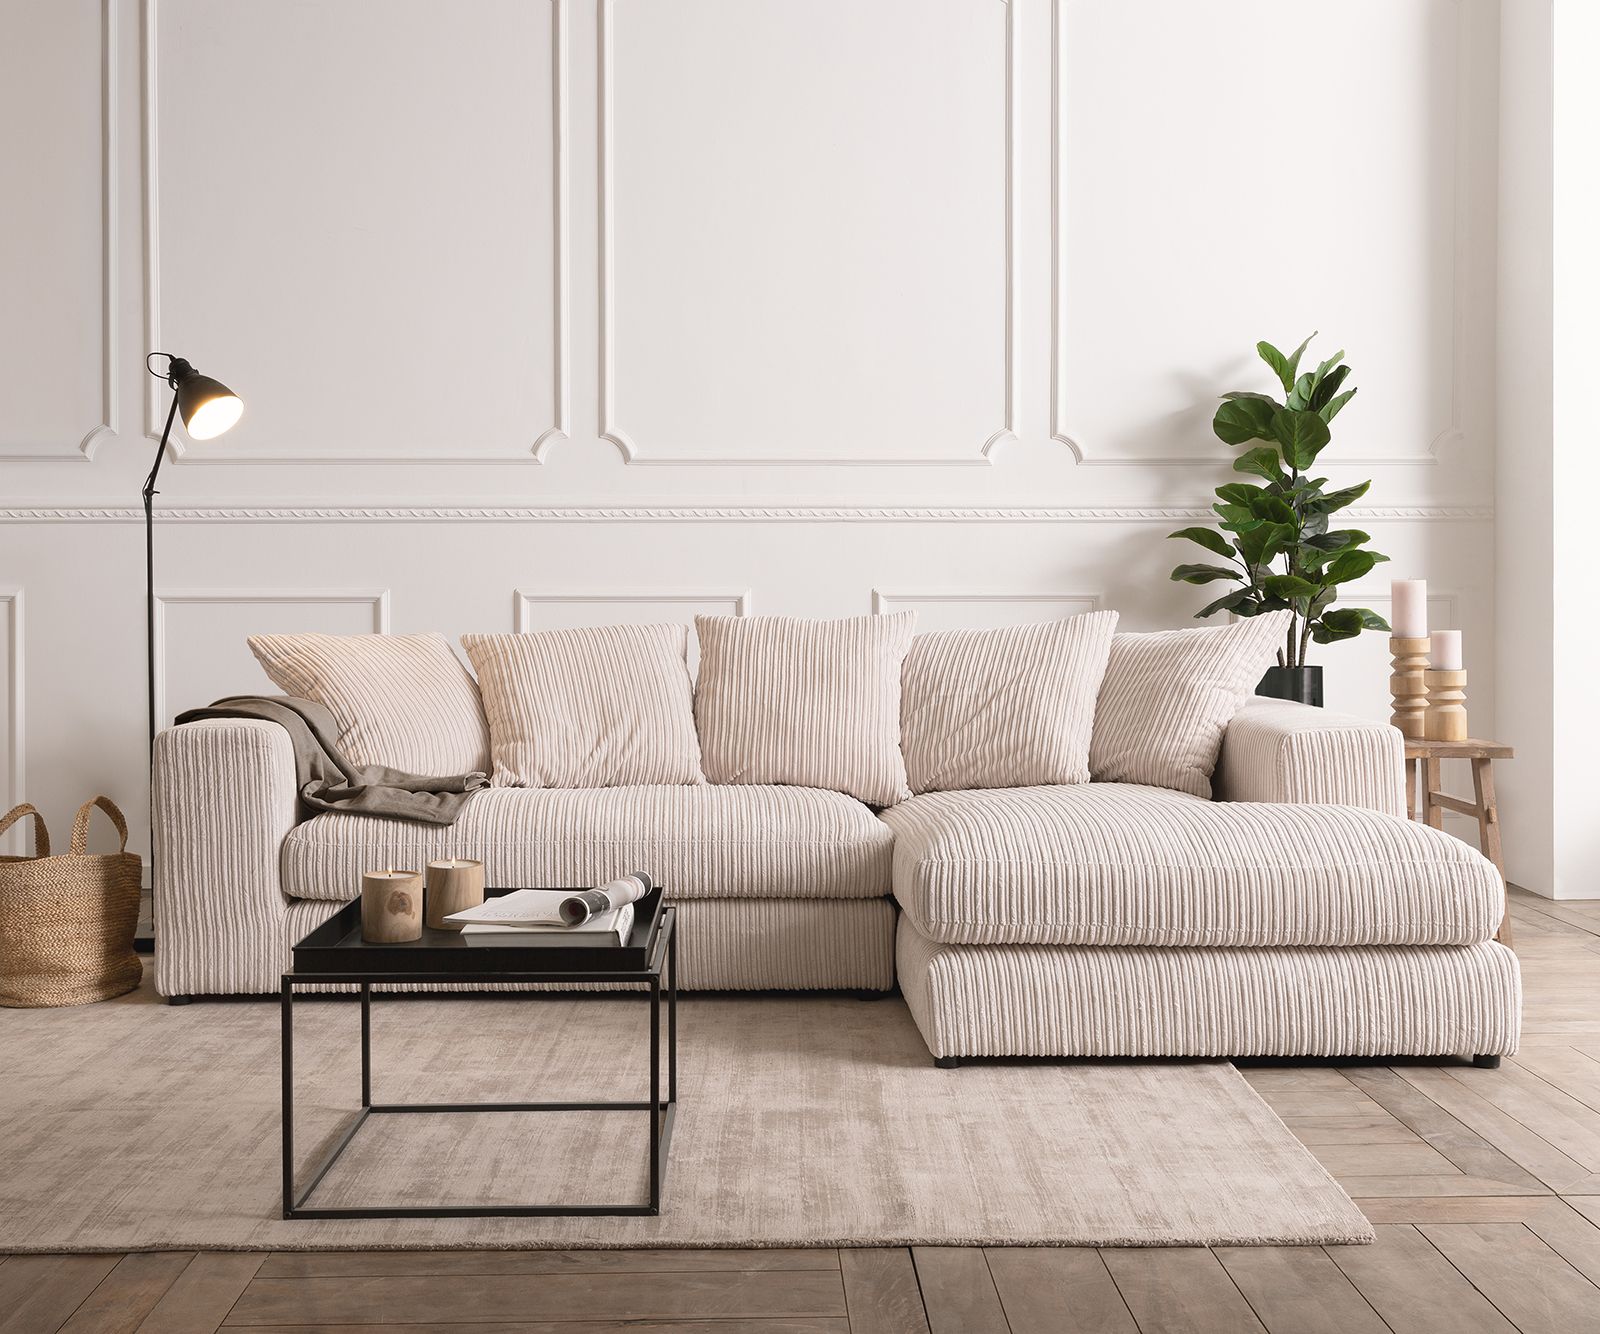 How to select the white sofa